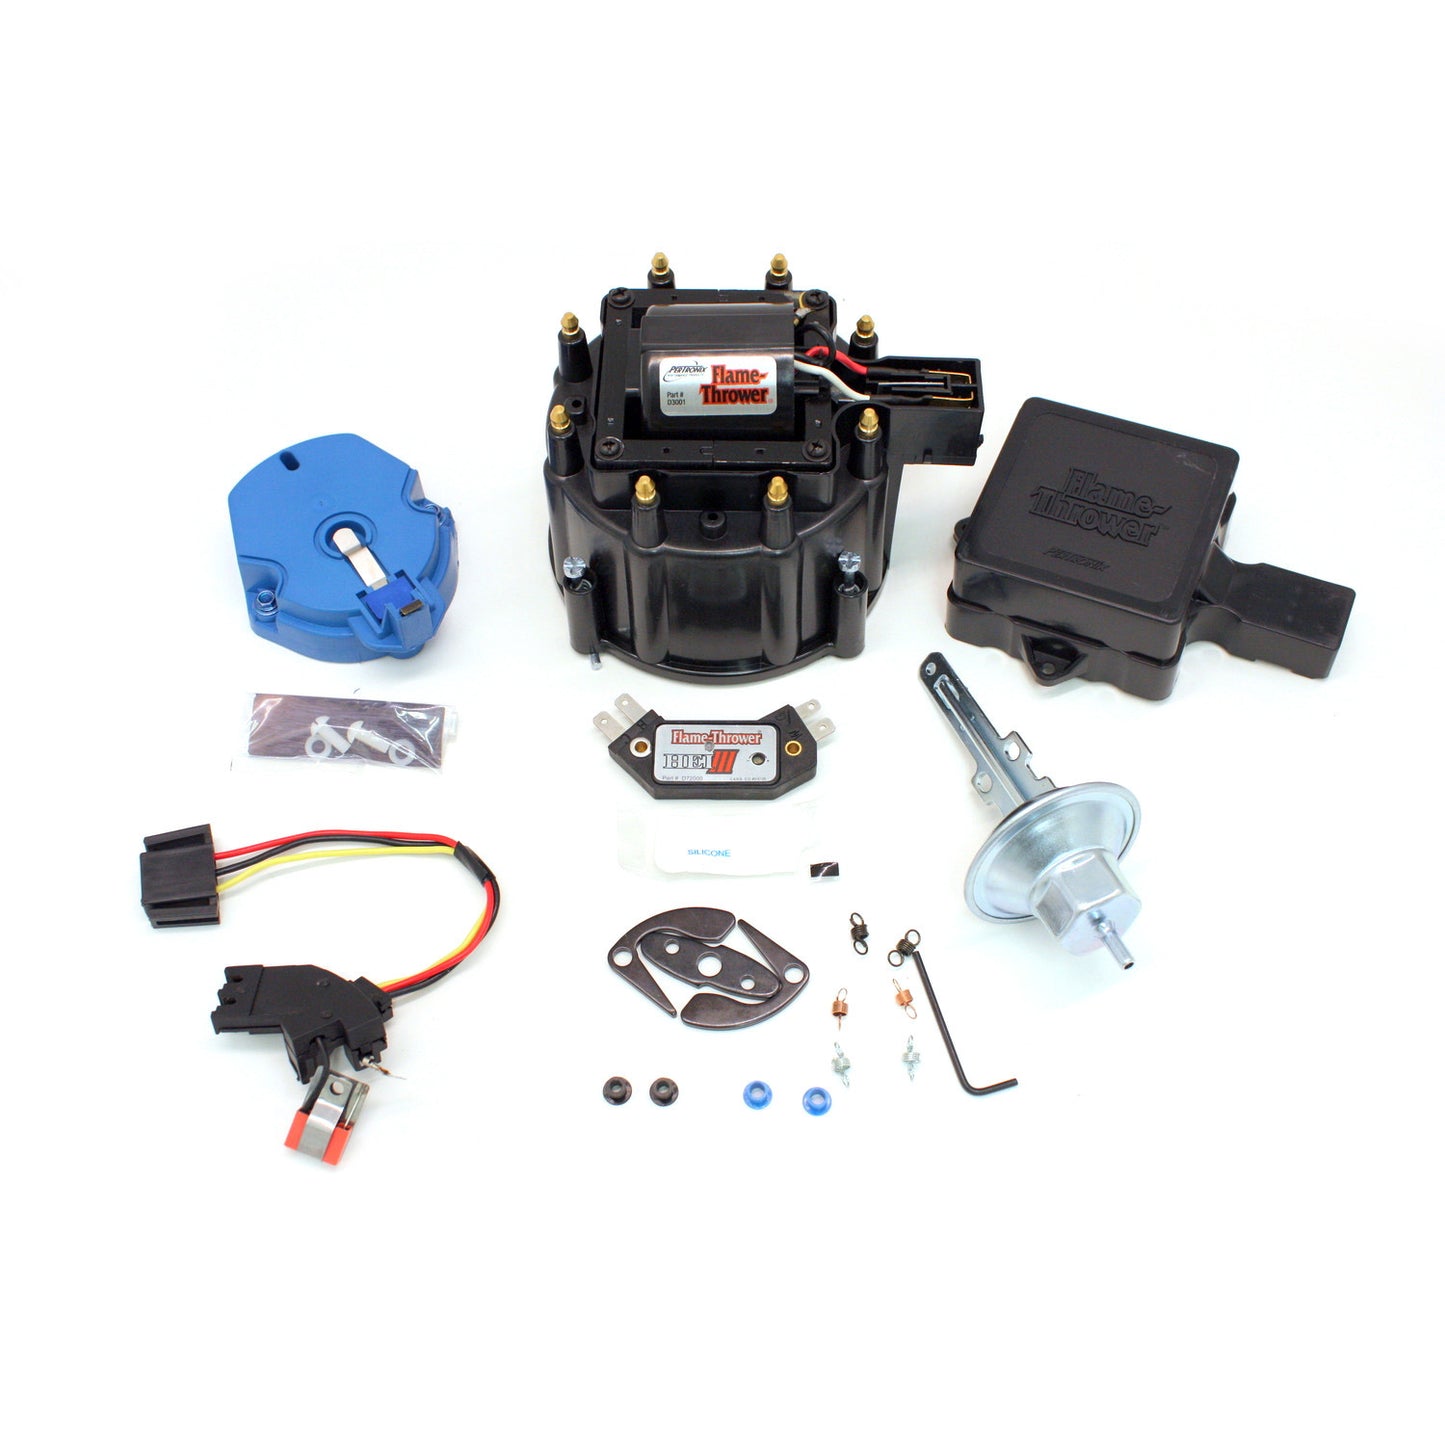 PerTronix D78010 Flame-Thrower GM HEI III Tune Up Buick/Oldsmobile/Pontiac/Corvette Kit Black Cap with multiple sparks and an adjustable digital rev limiter